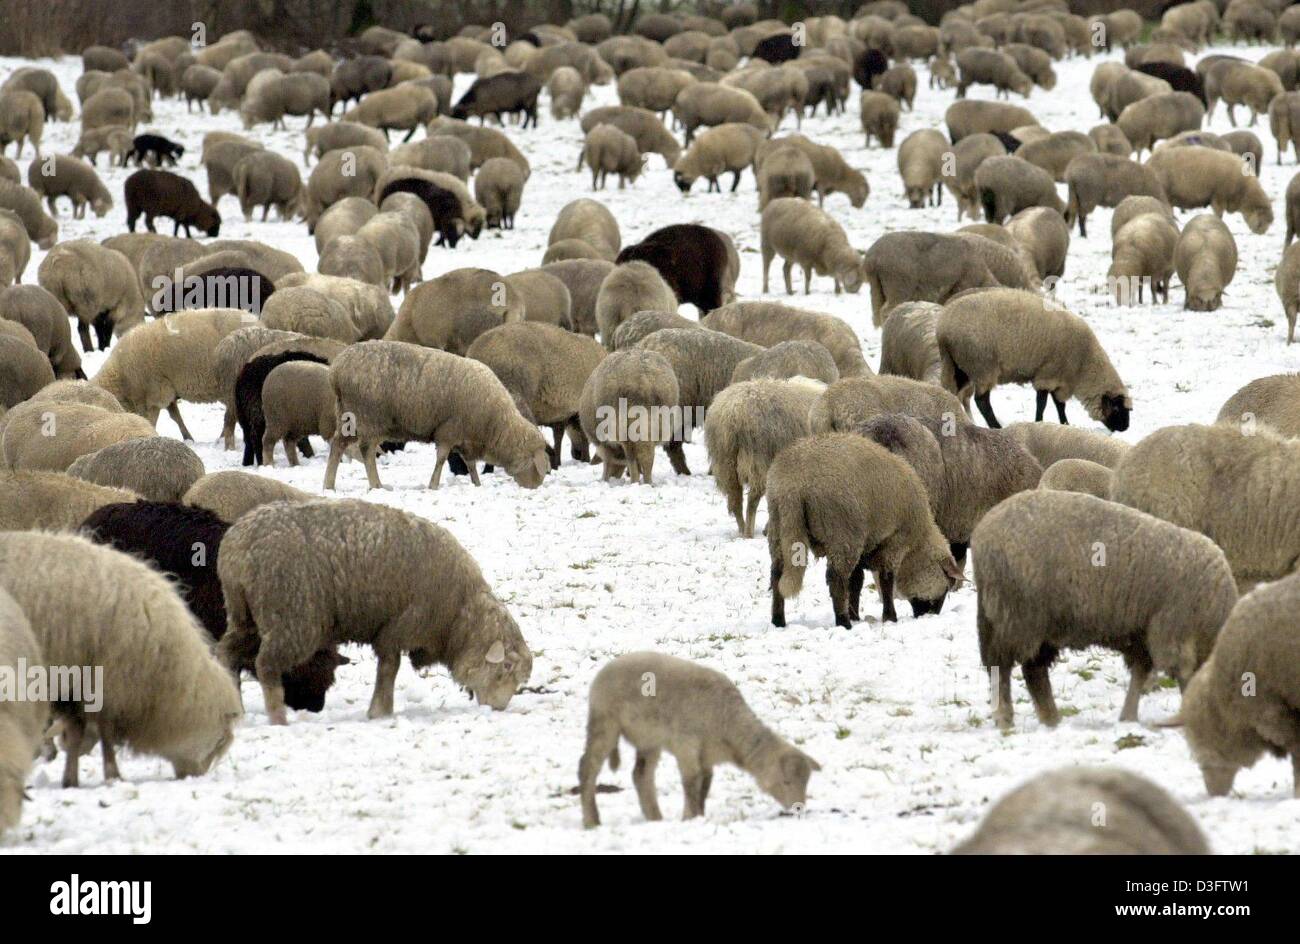 (dpa) - A herd of sheep peacefully graze on a meadow covered with snow near the Black Forest city of Freiburg, southwestern Germany, 4 February 2003. Stock Photo